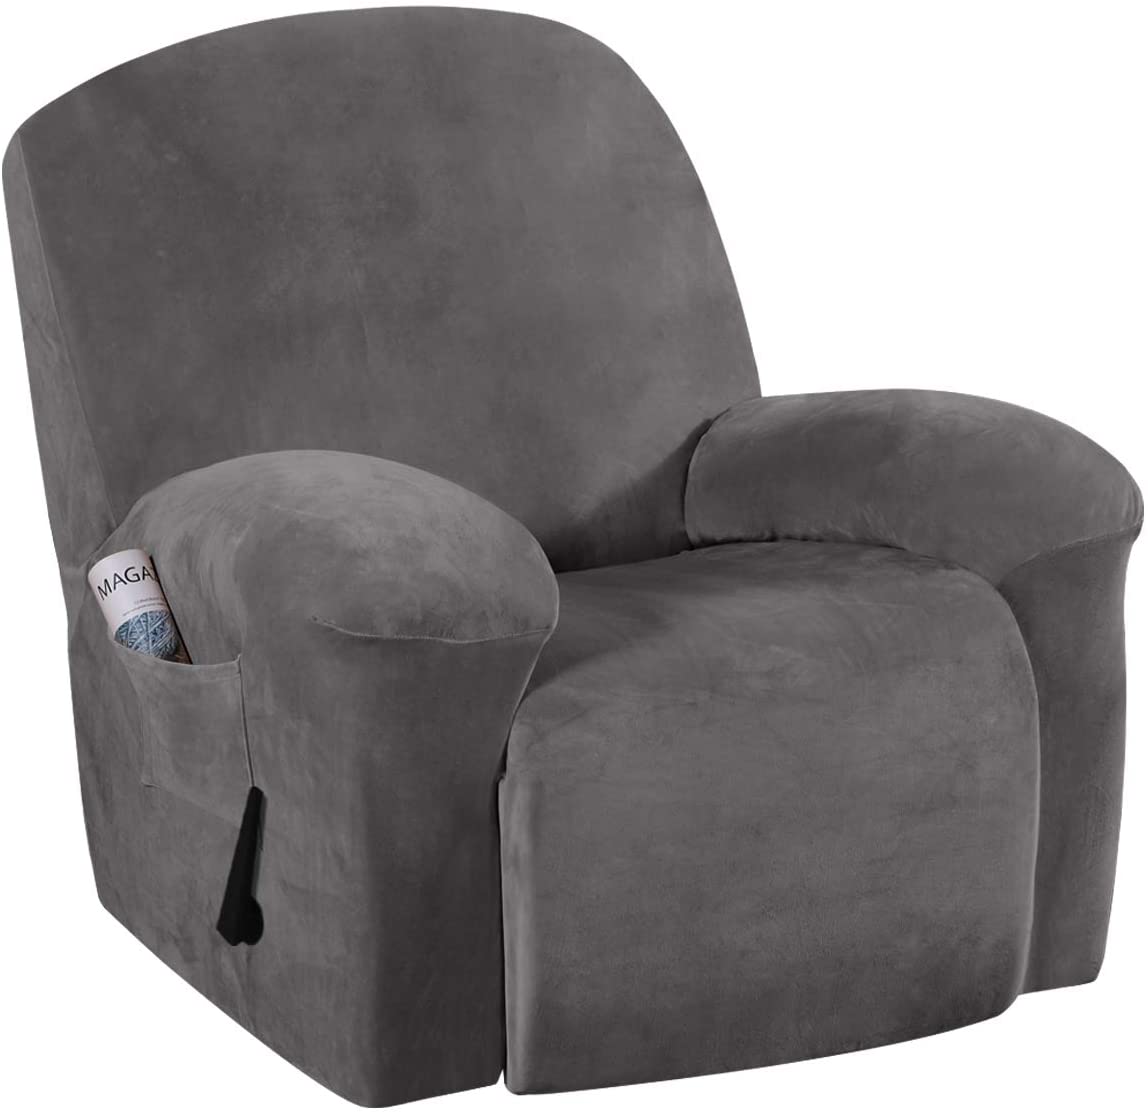 H.VERSAILTEX Utility Pocket Recliner Cover For Large Recliners